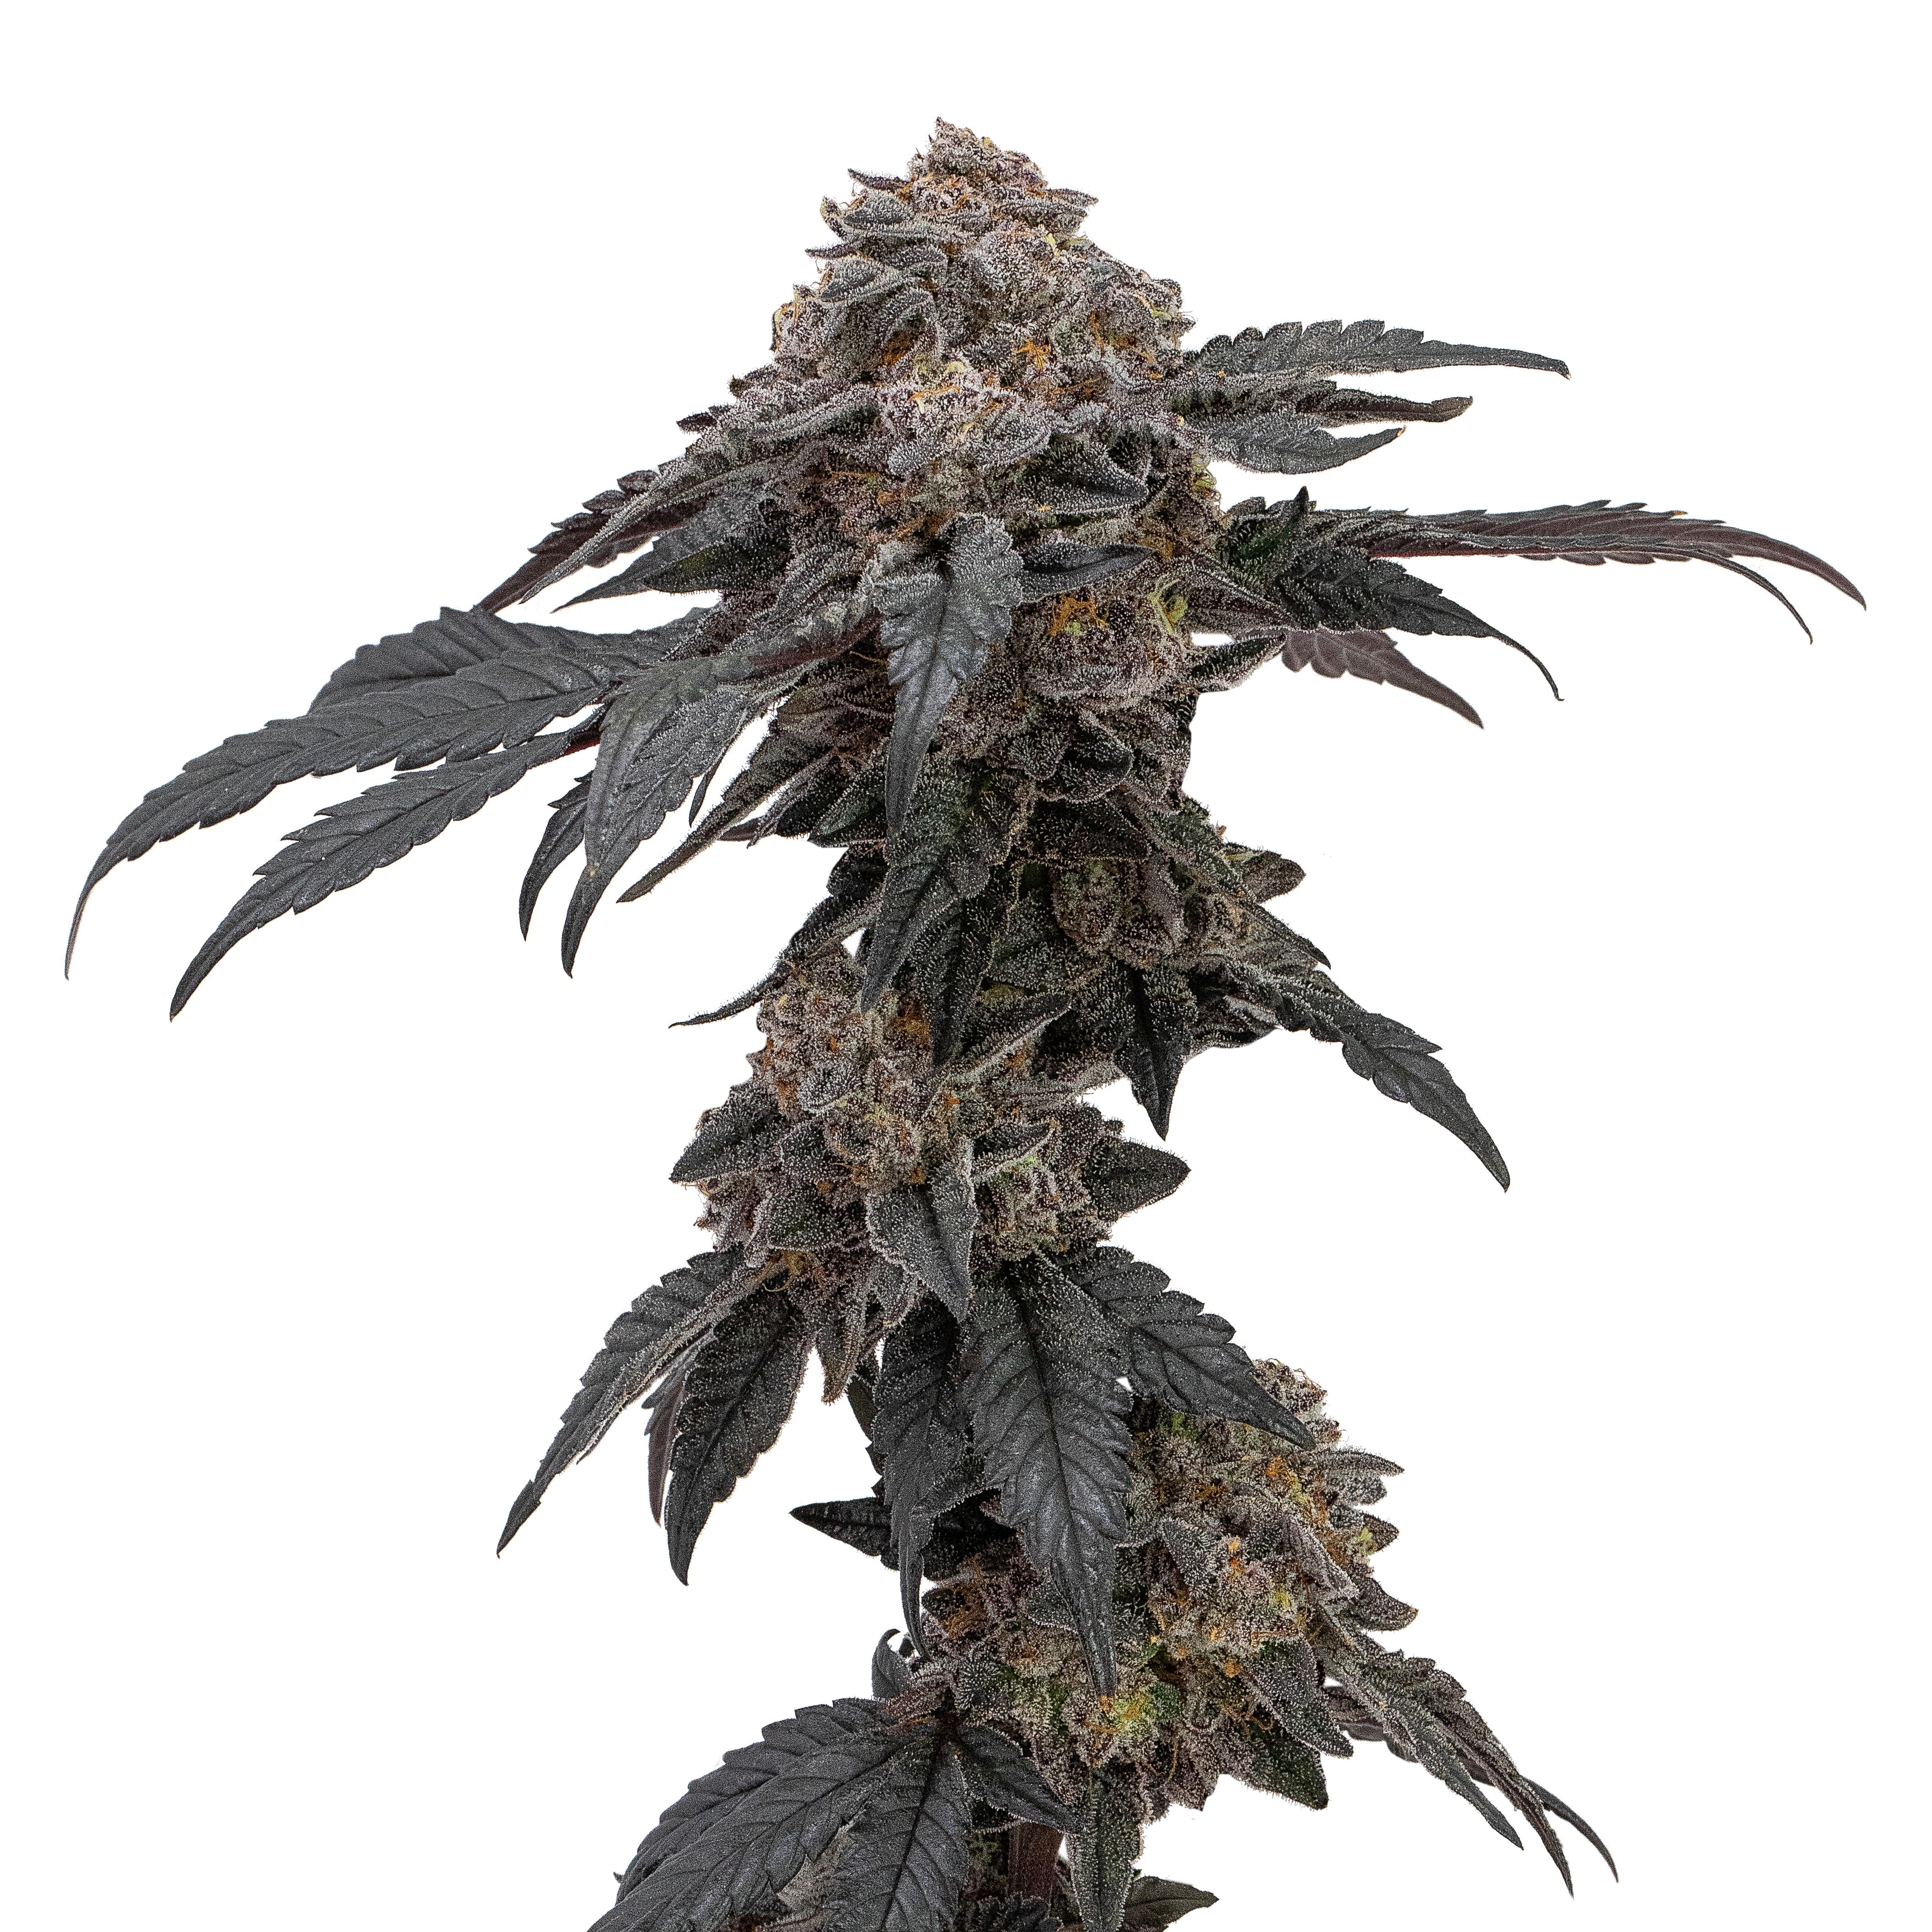 A cannabis flower cola on a thin stalk with buds and leaves stands tall against a white background.